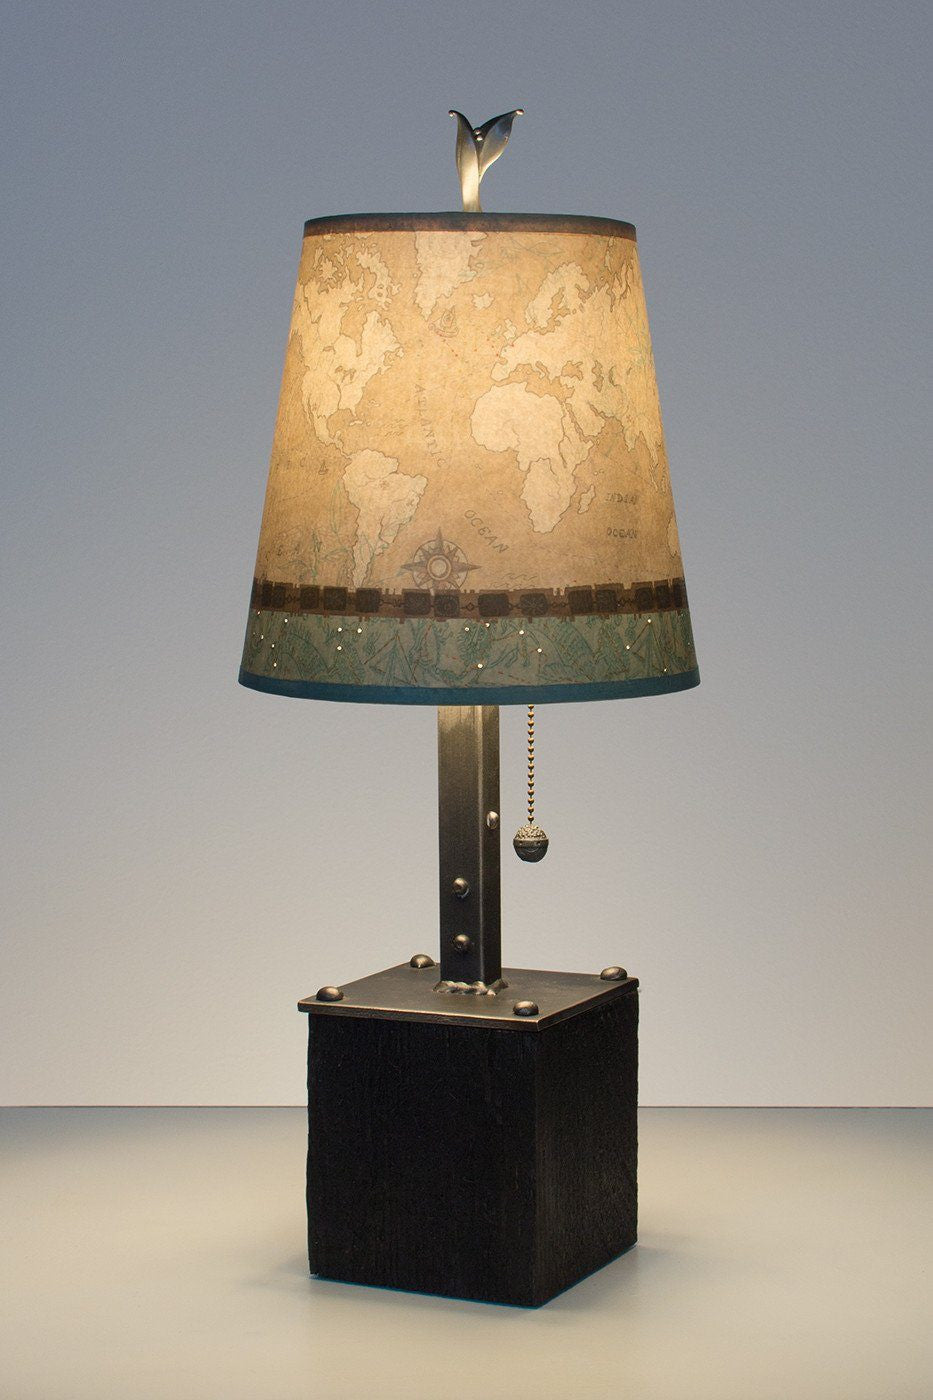 Janna Ugone &amp; Co Table Lamps Steel Table Lamp on Reclaimed Wood with Small Drum Shade in Voyages